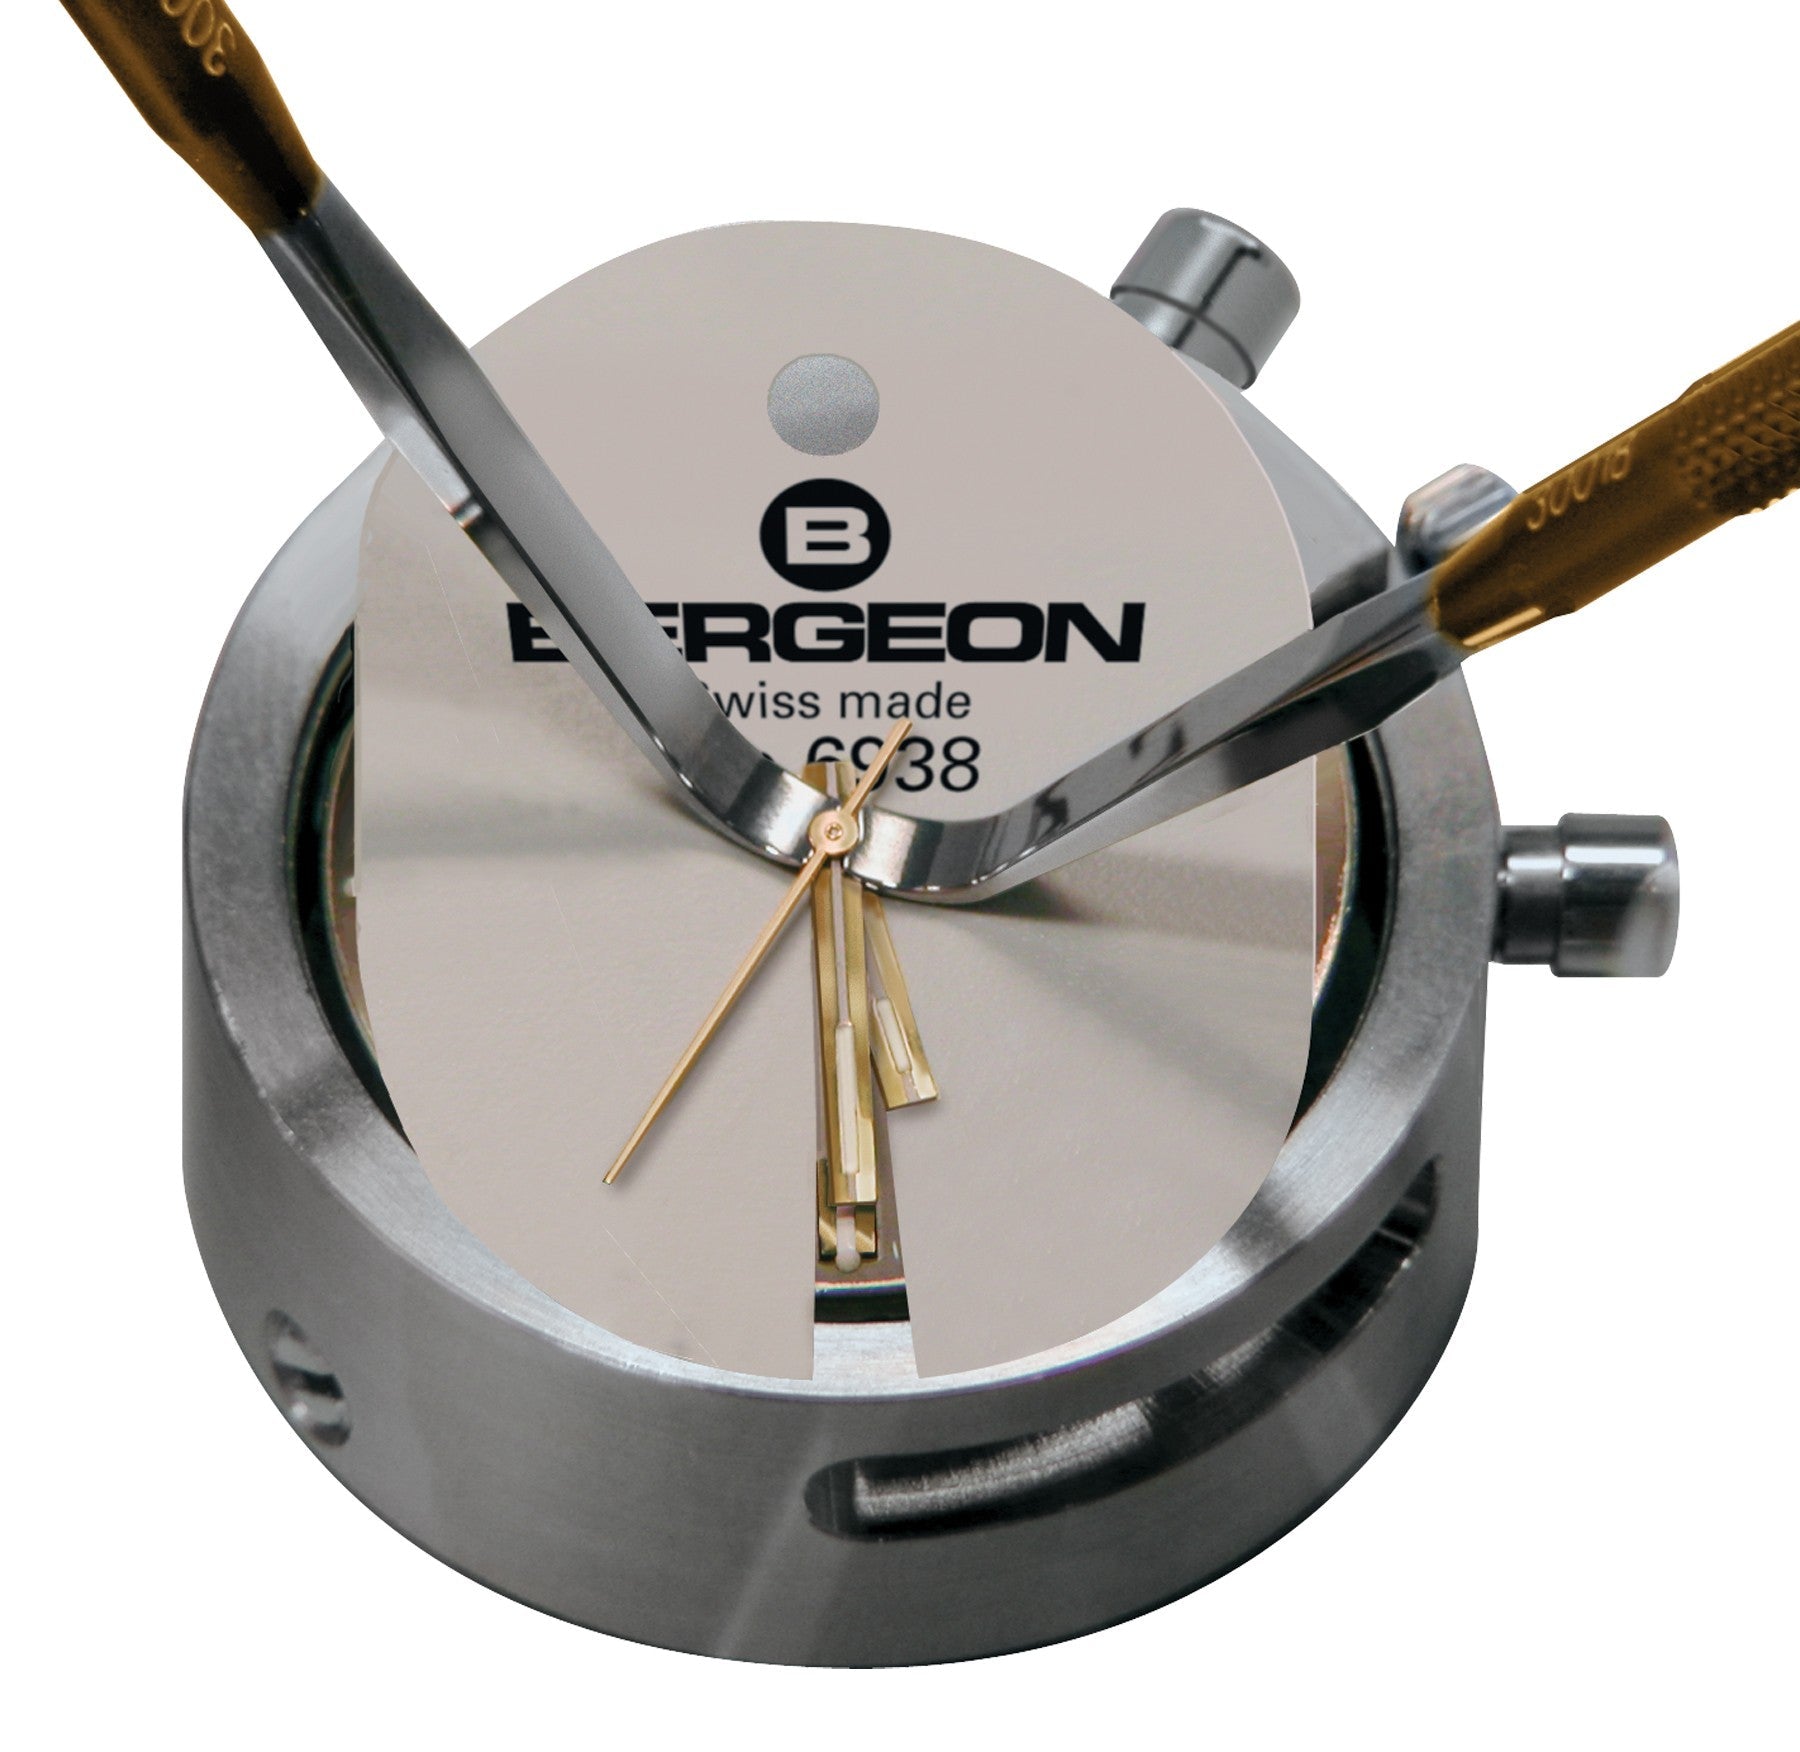 Bergeon Dial Protector